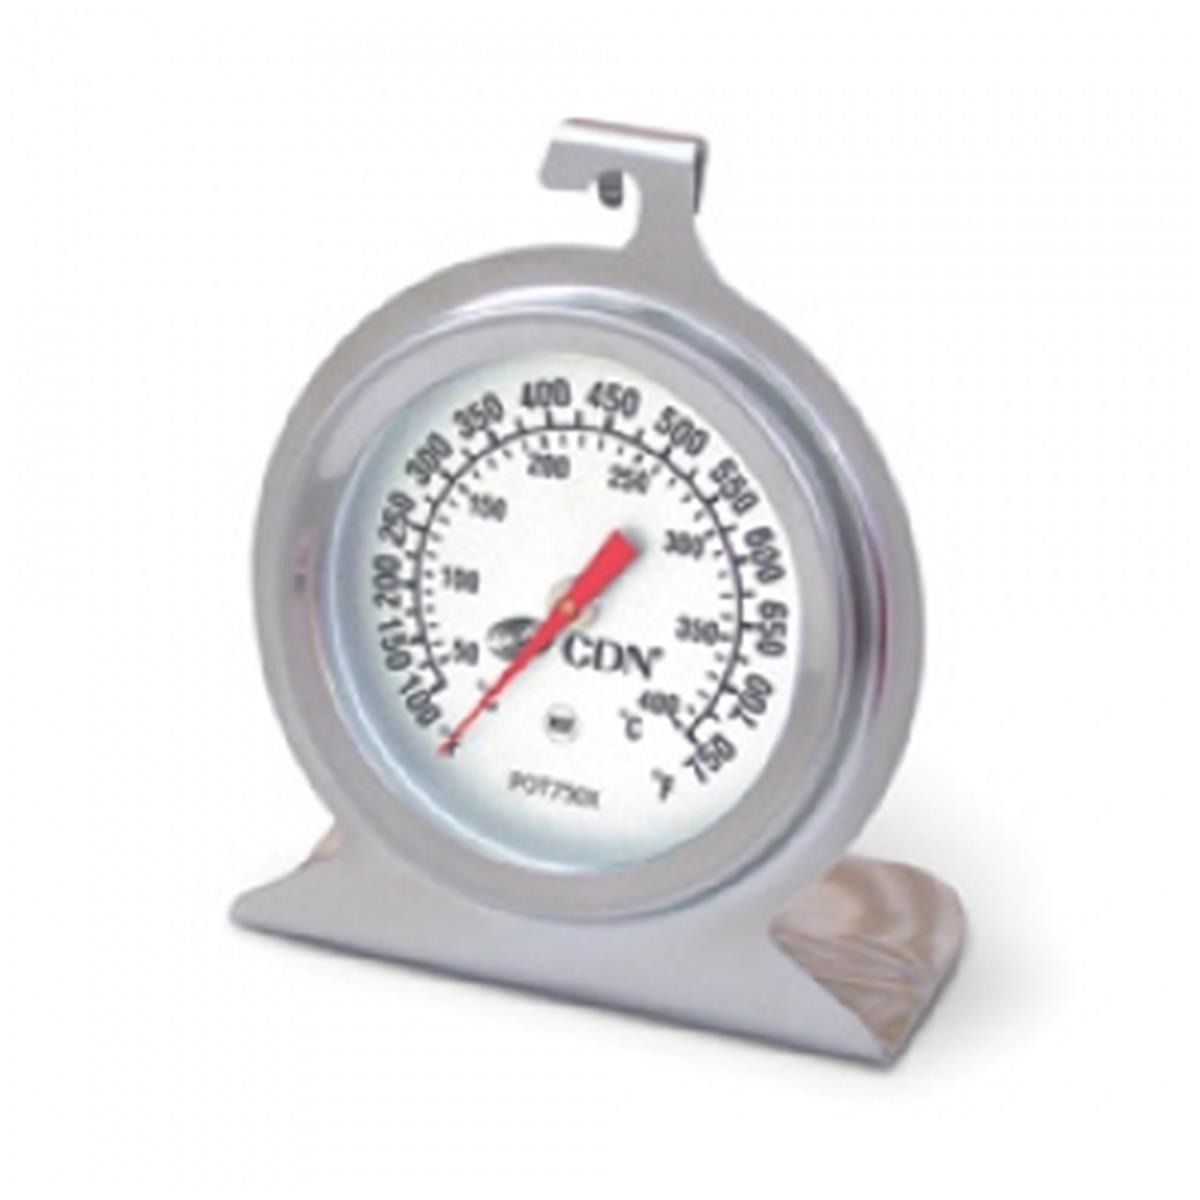 Pot750x Proaccurate High Heat Oven Thermometer